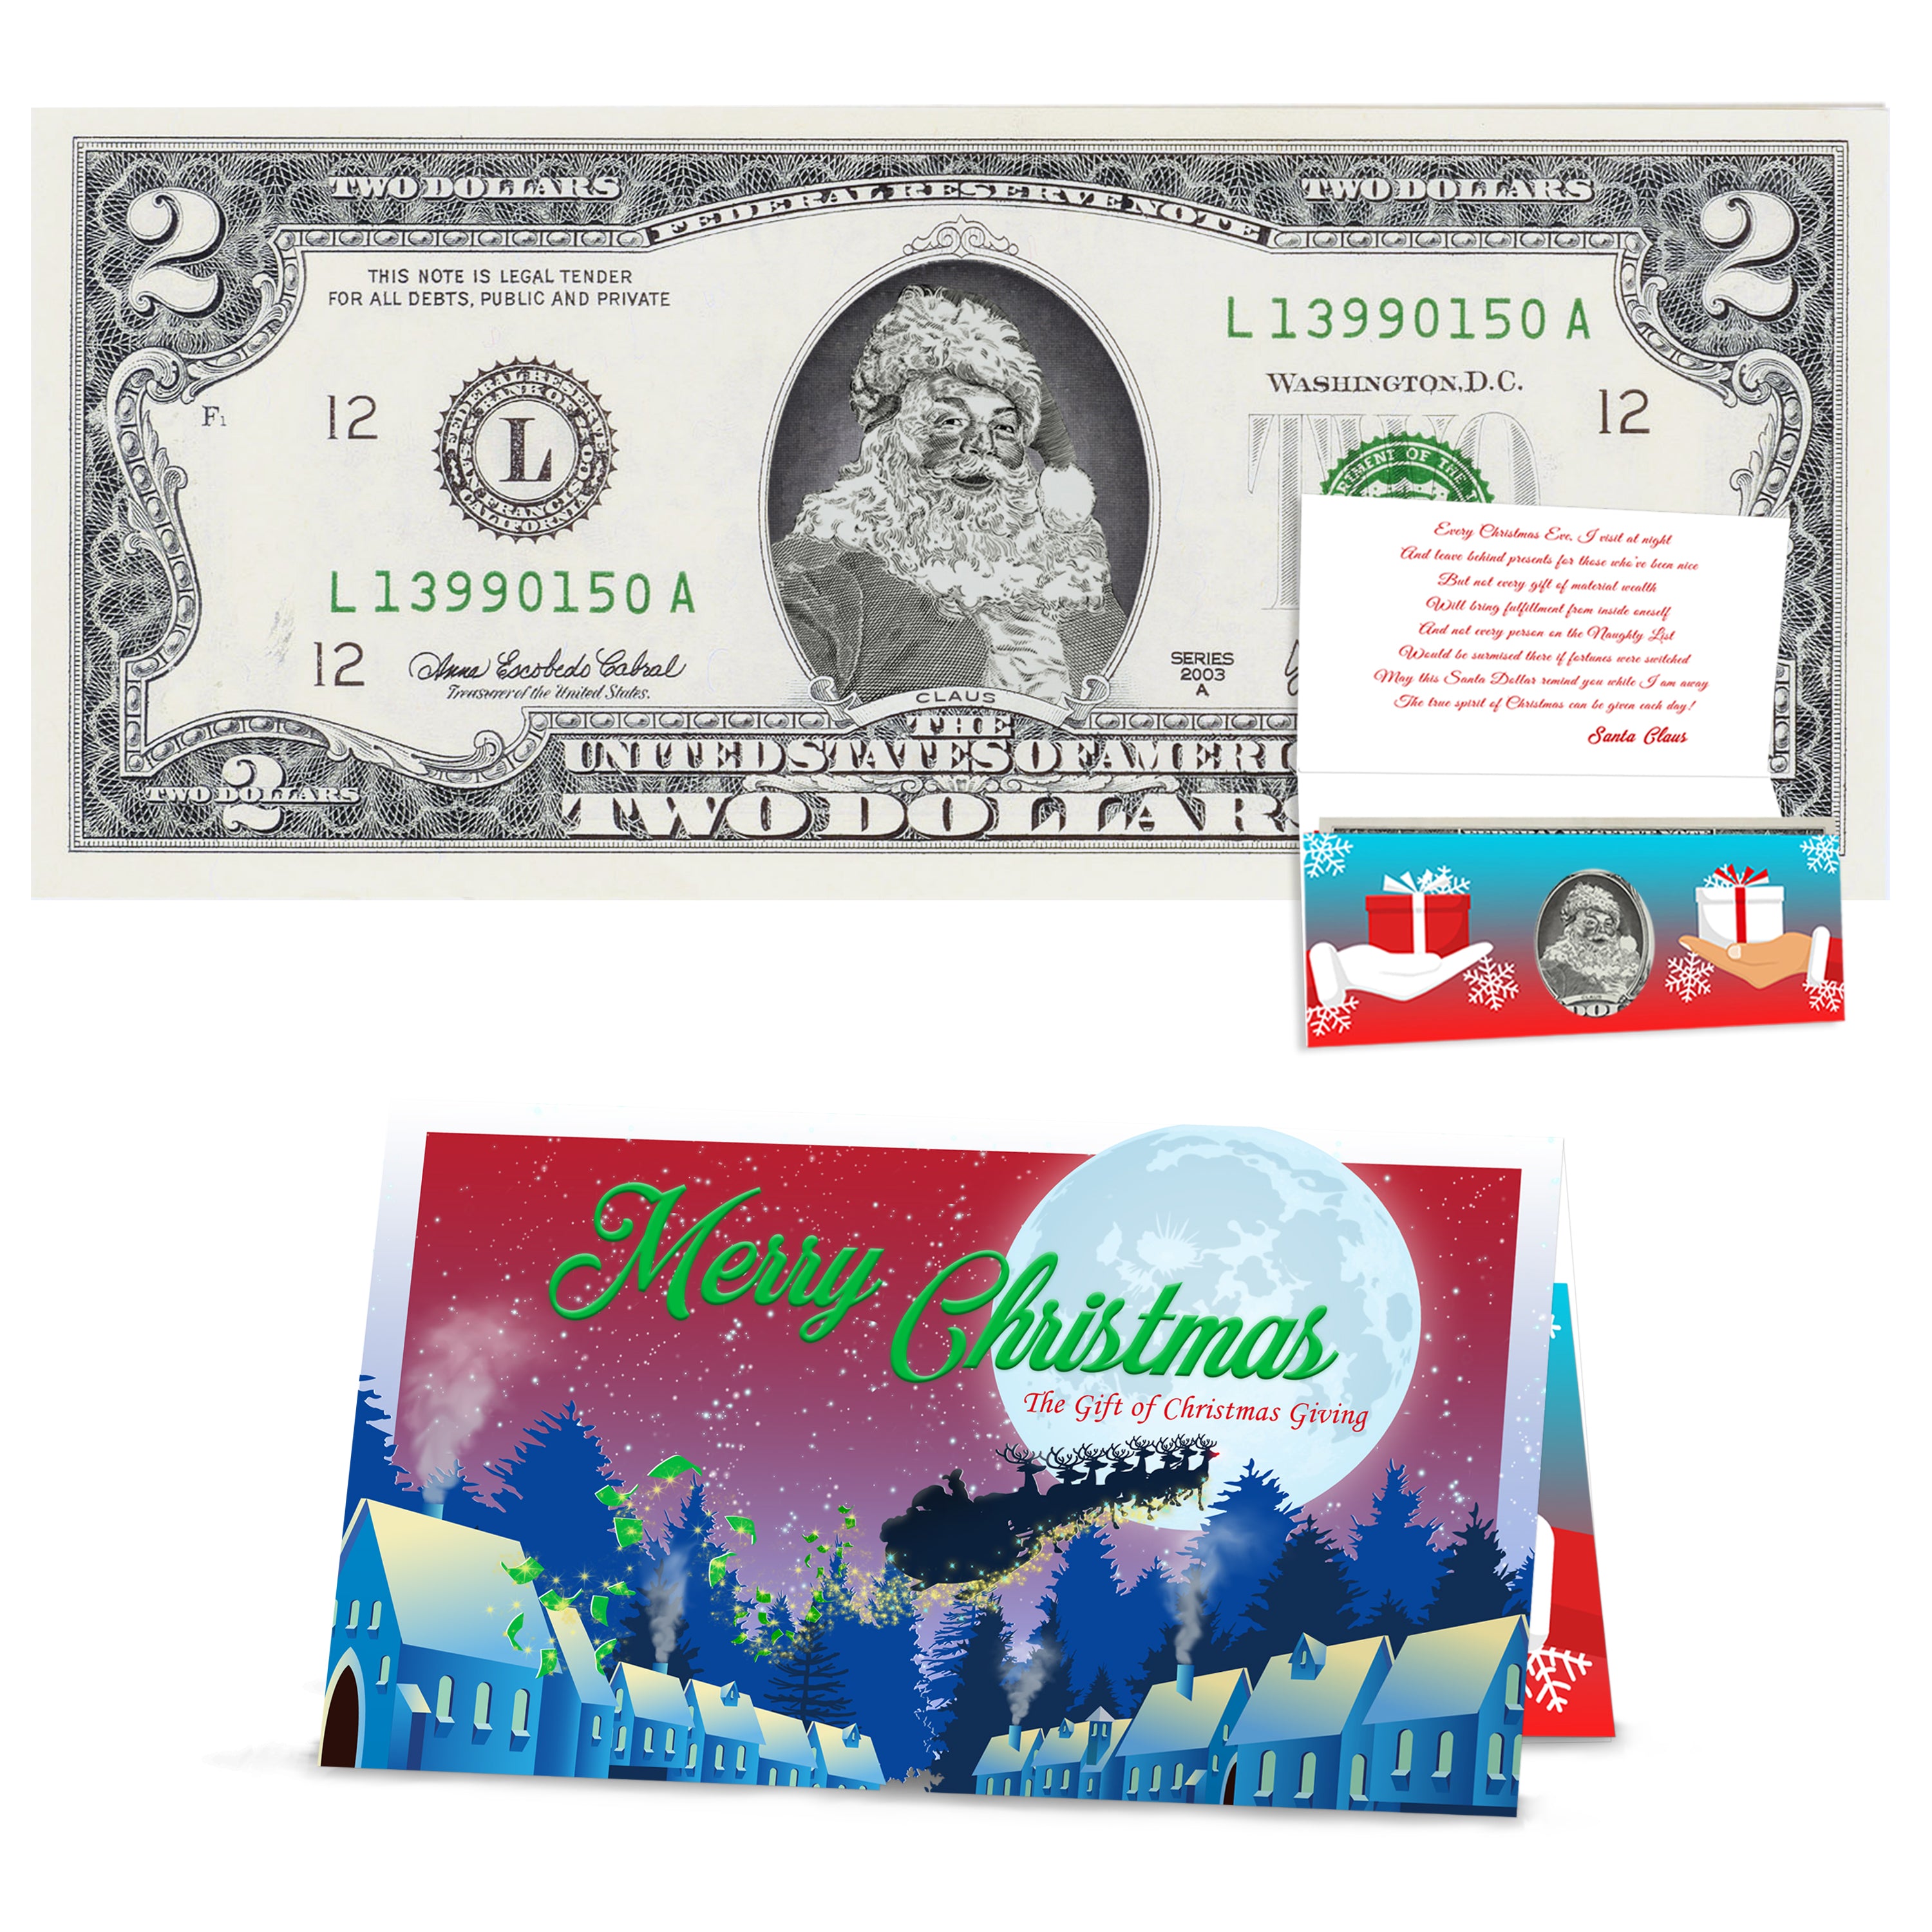 Official Santa Claus $2 Bill. Real USD. Card and Letter from Santa